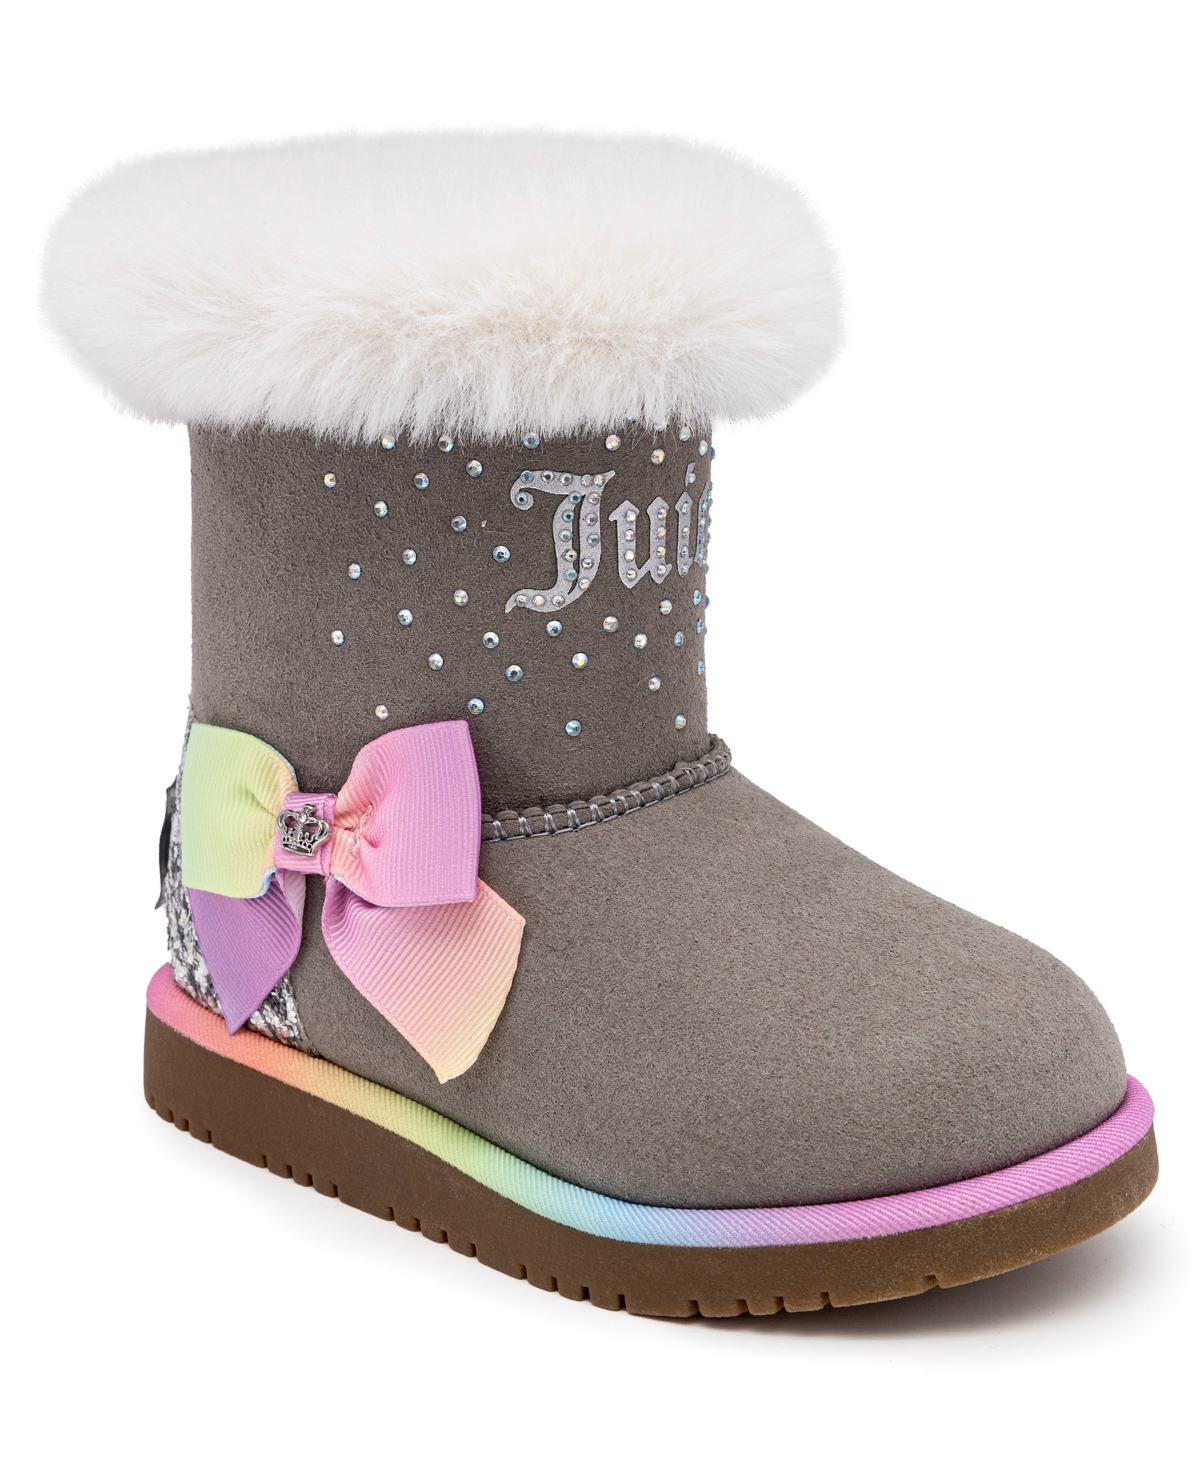 Juicy Couture Big Girls Lil Coronado 2 Cold Weather Boots In Gray